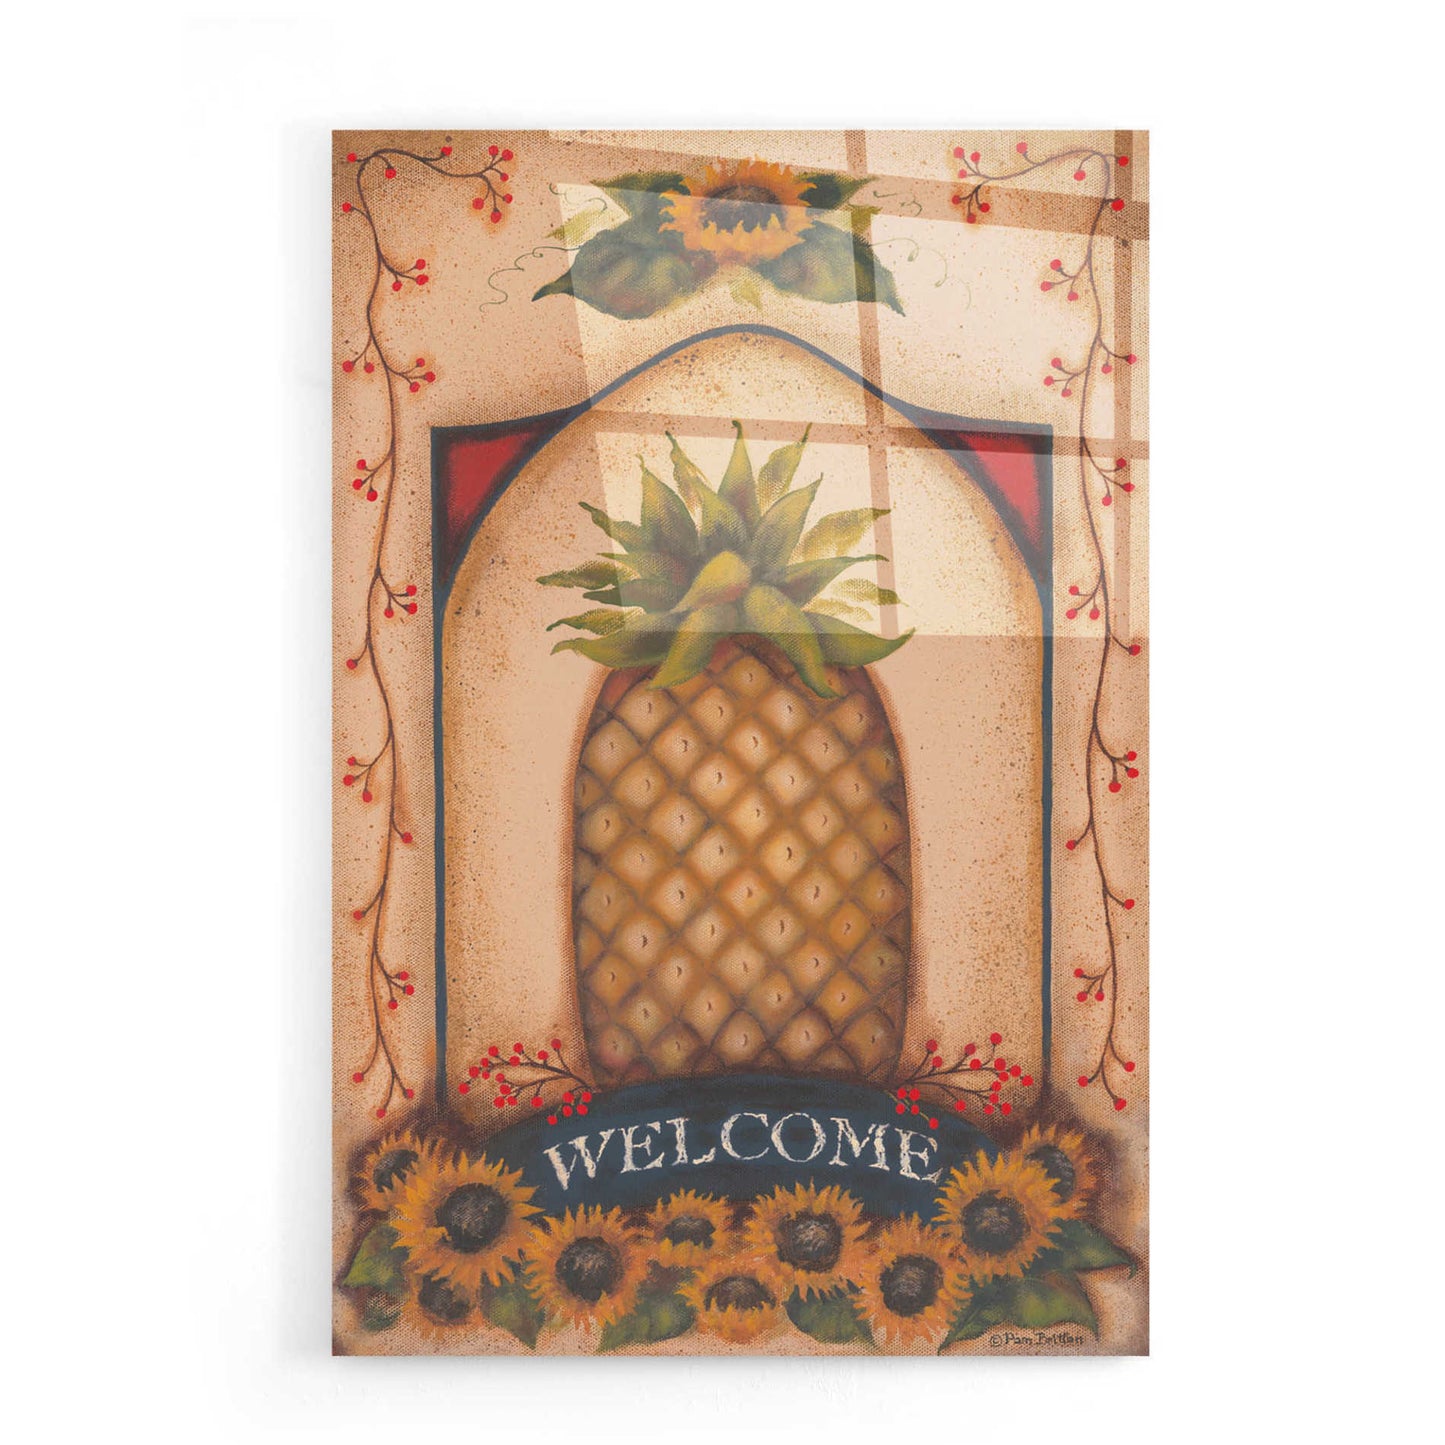 Epic Art 'Welcome Pineapple & Sunflowers' by Pam Britton, Acrylic Glass Wall Art,16x24